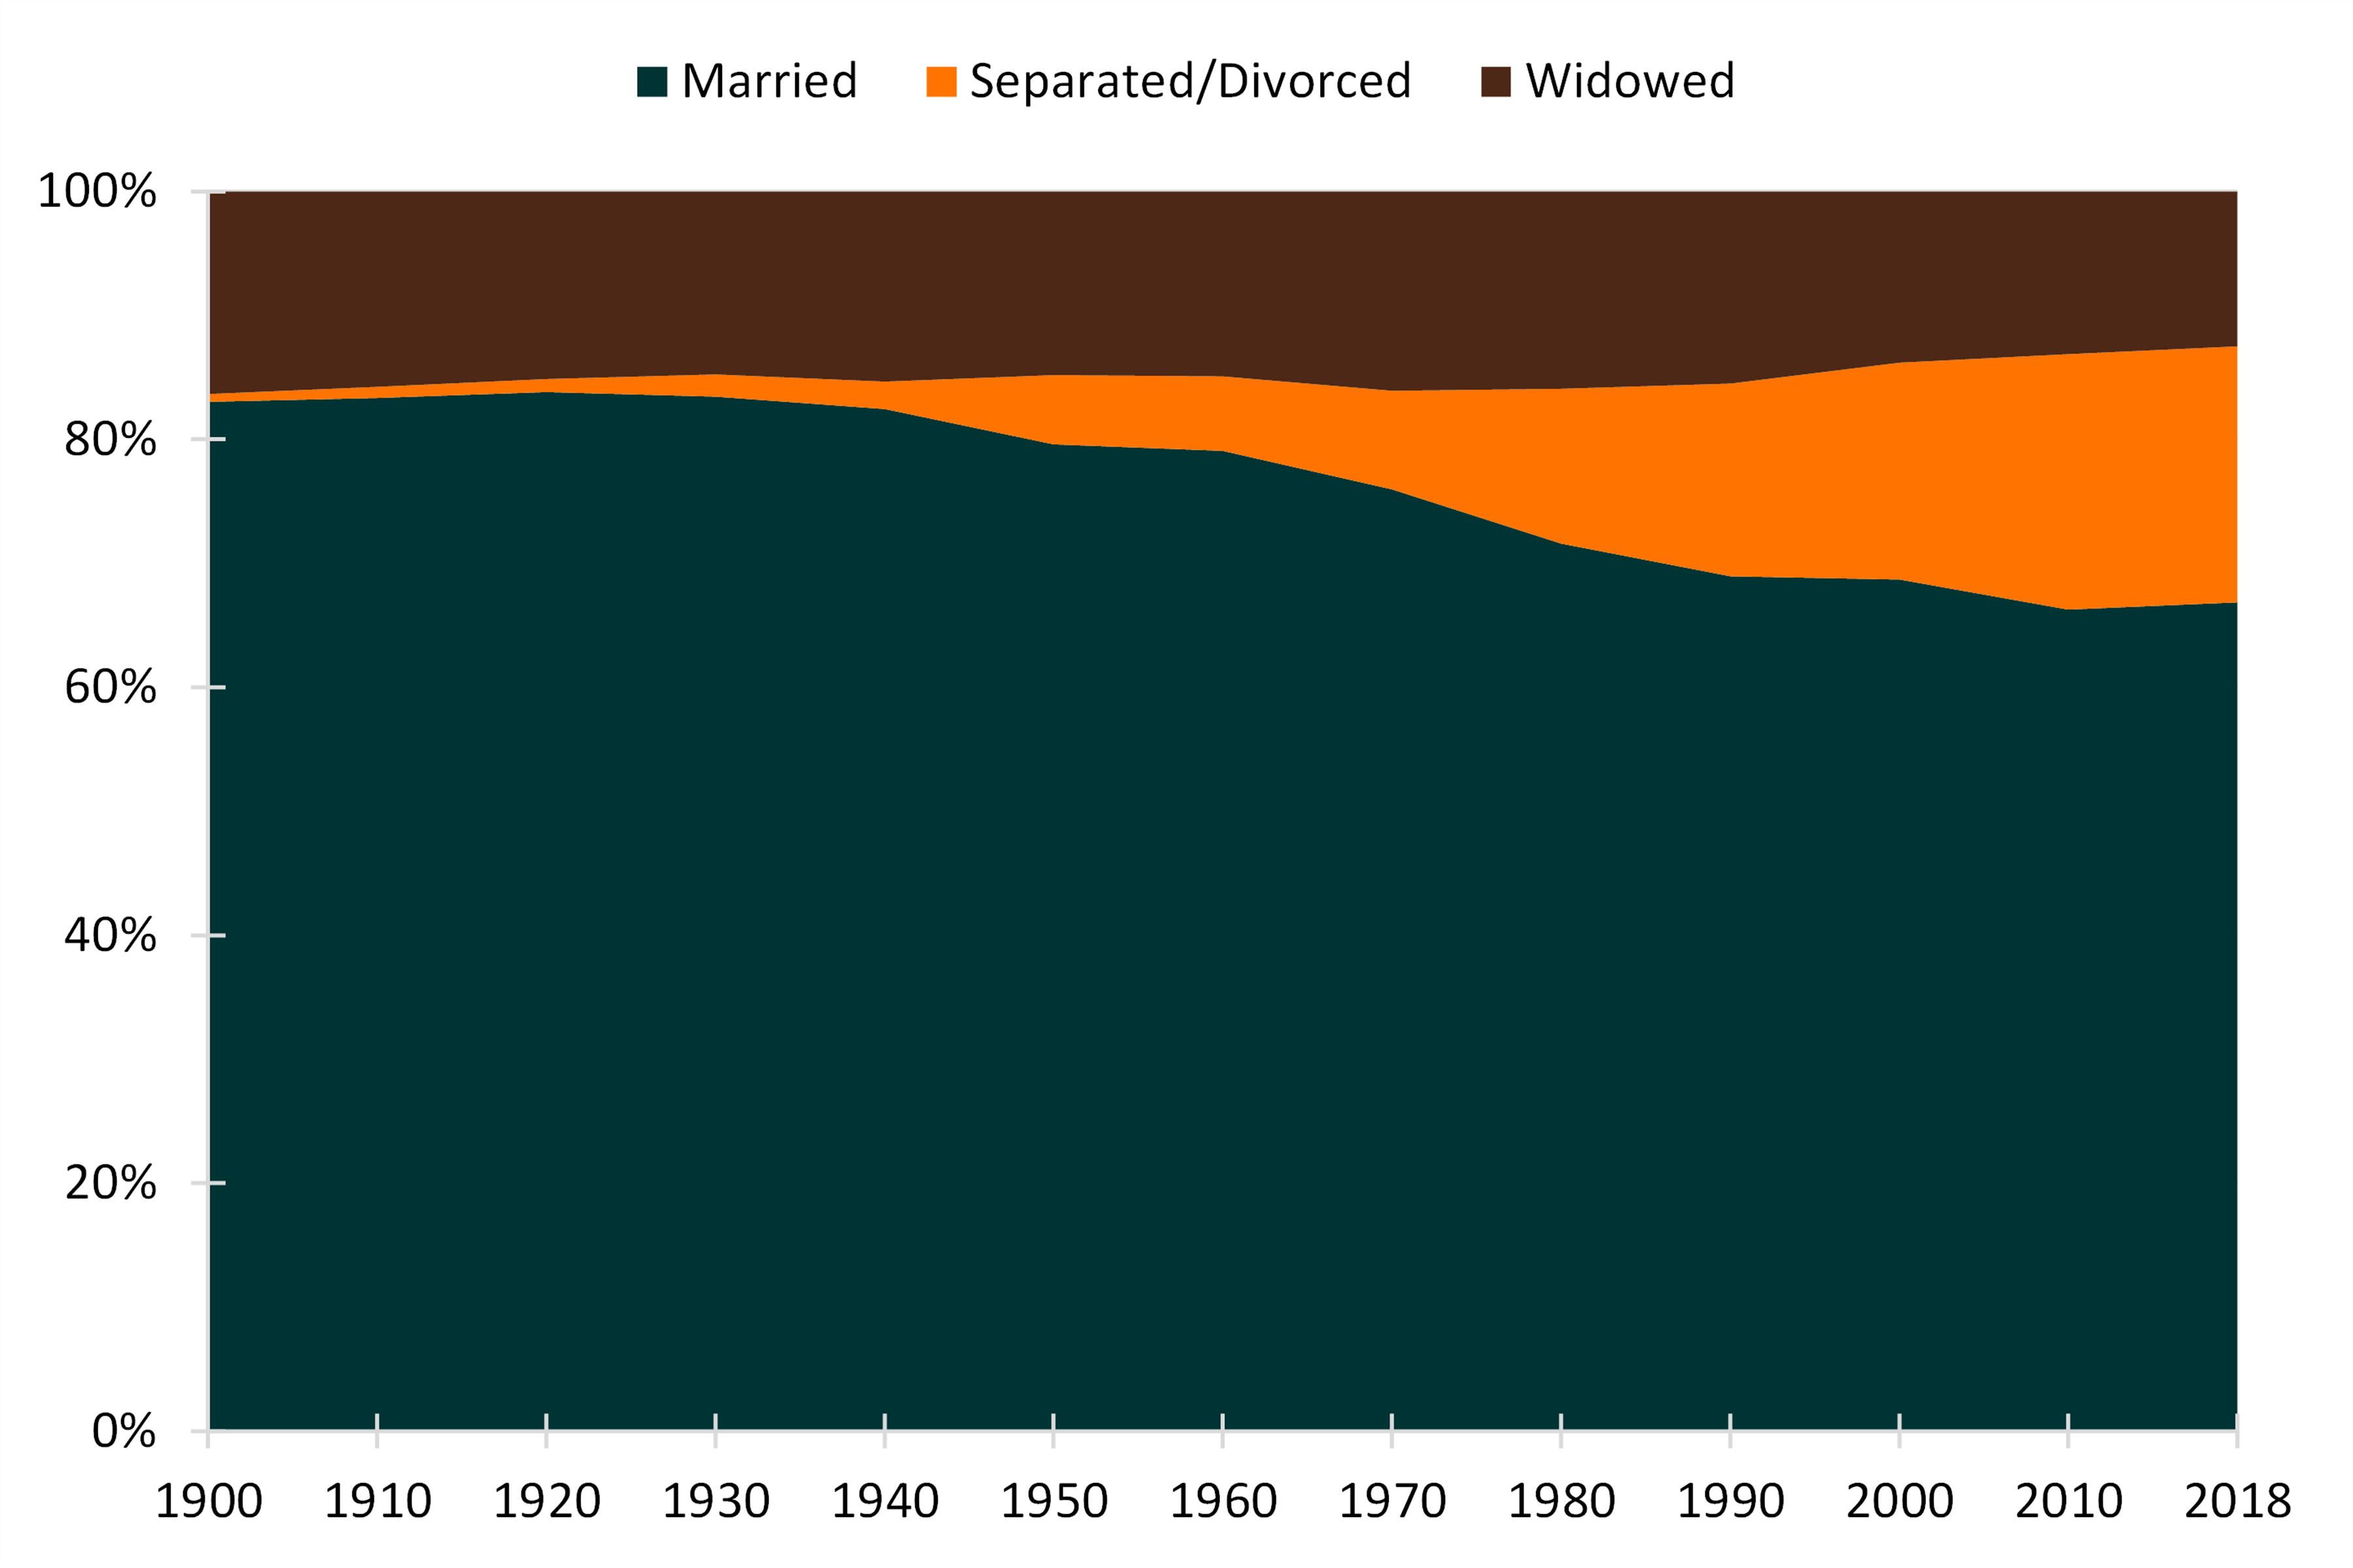 tri-color line chart showing Figure 2. Current Marital Status of Ever-Married Women, 1900-2018